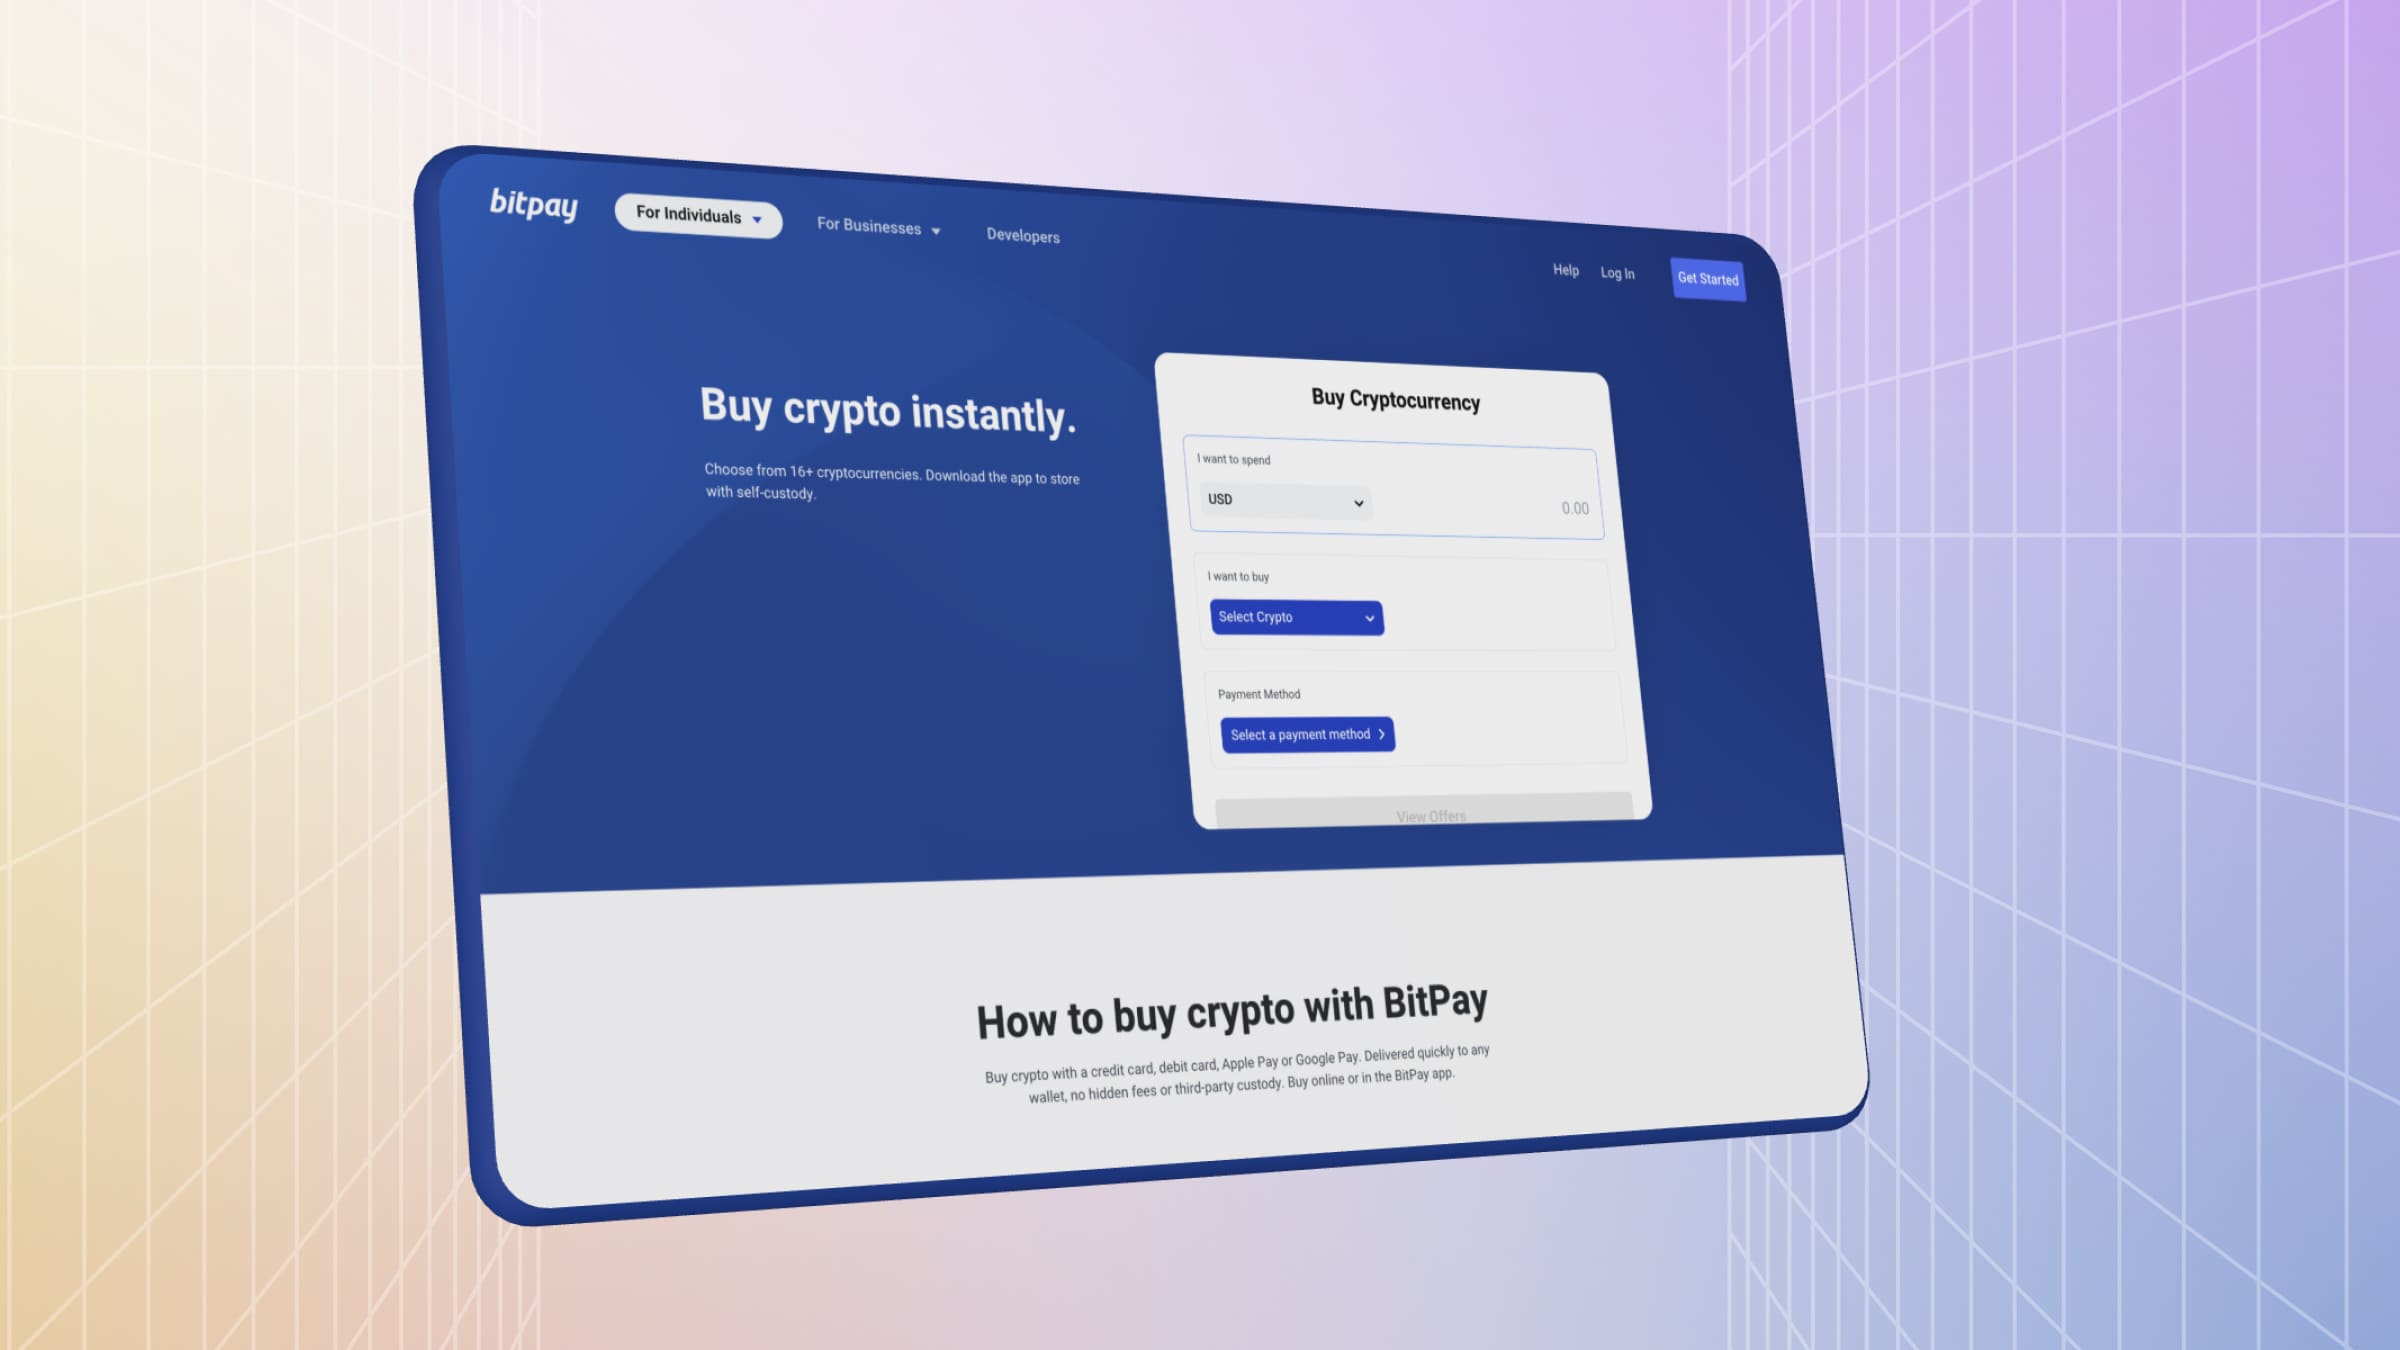 BitPay's website allows you to instantly buy more than 20 cryptocurrencies.